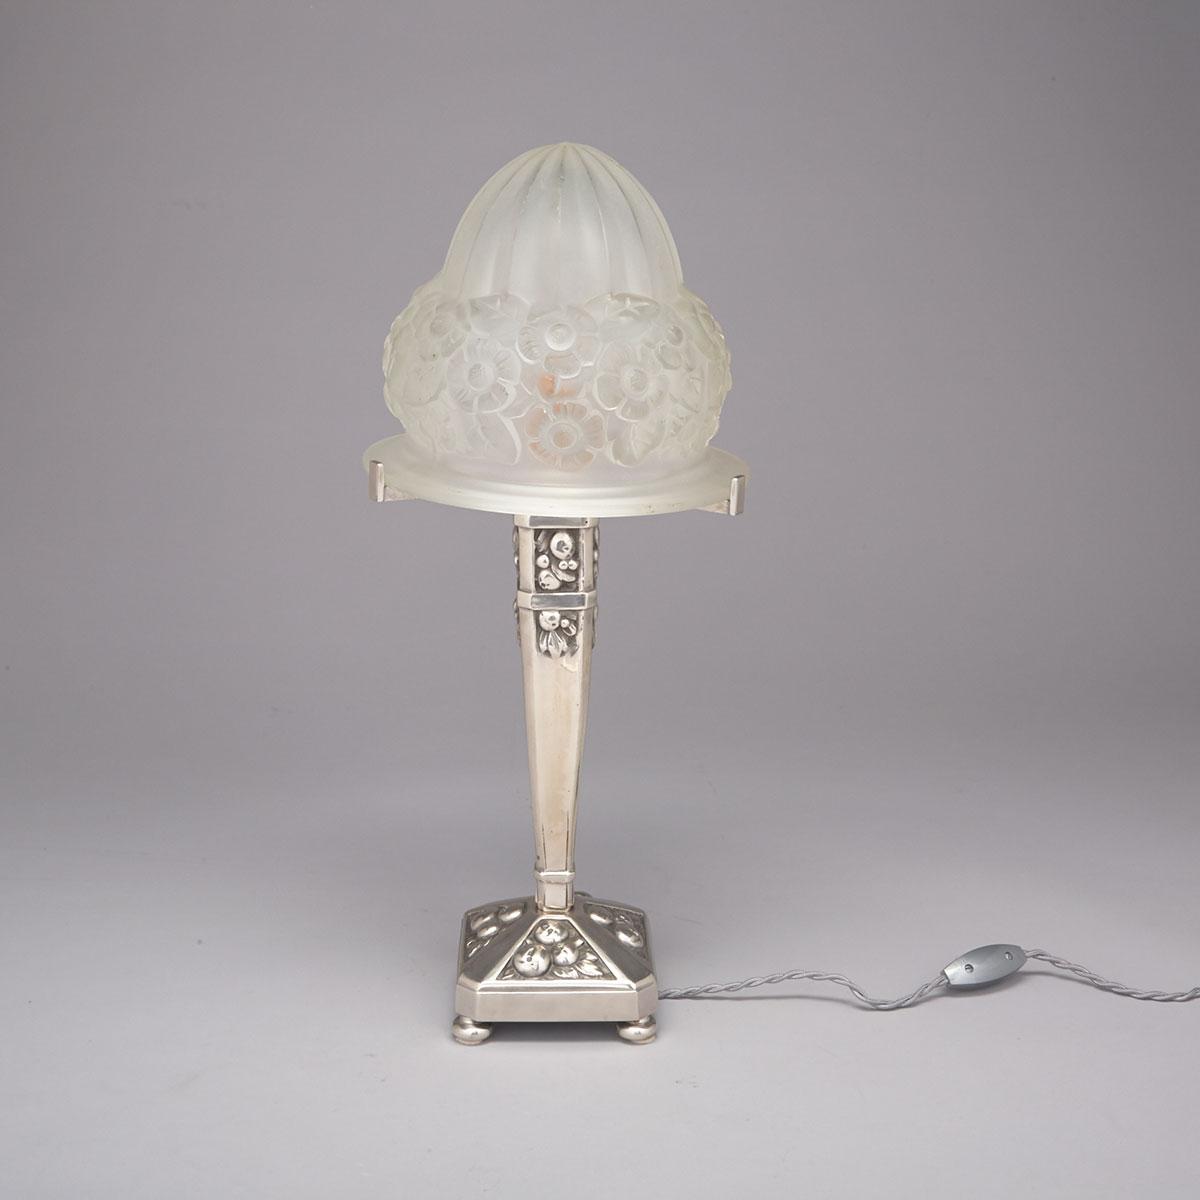 French Art Deco Nickel Plated Bronze and Glass Vanity Lamp, late 20th century